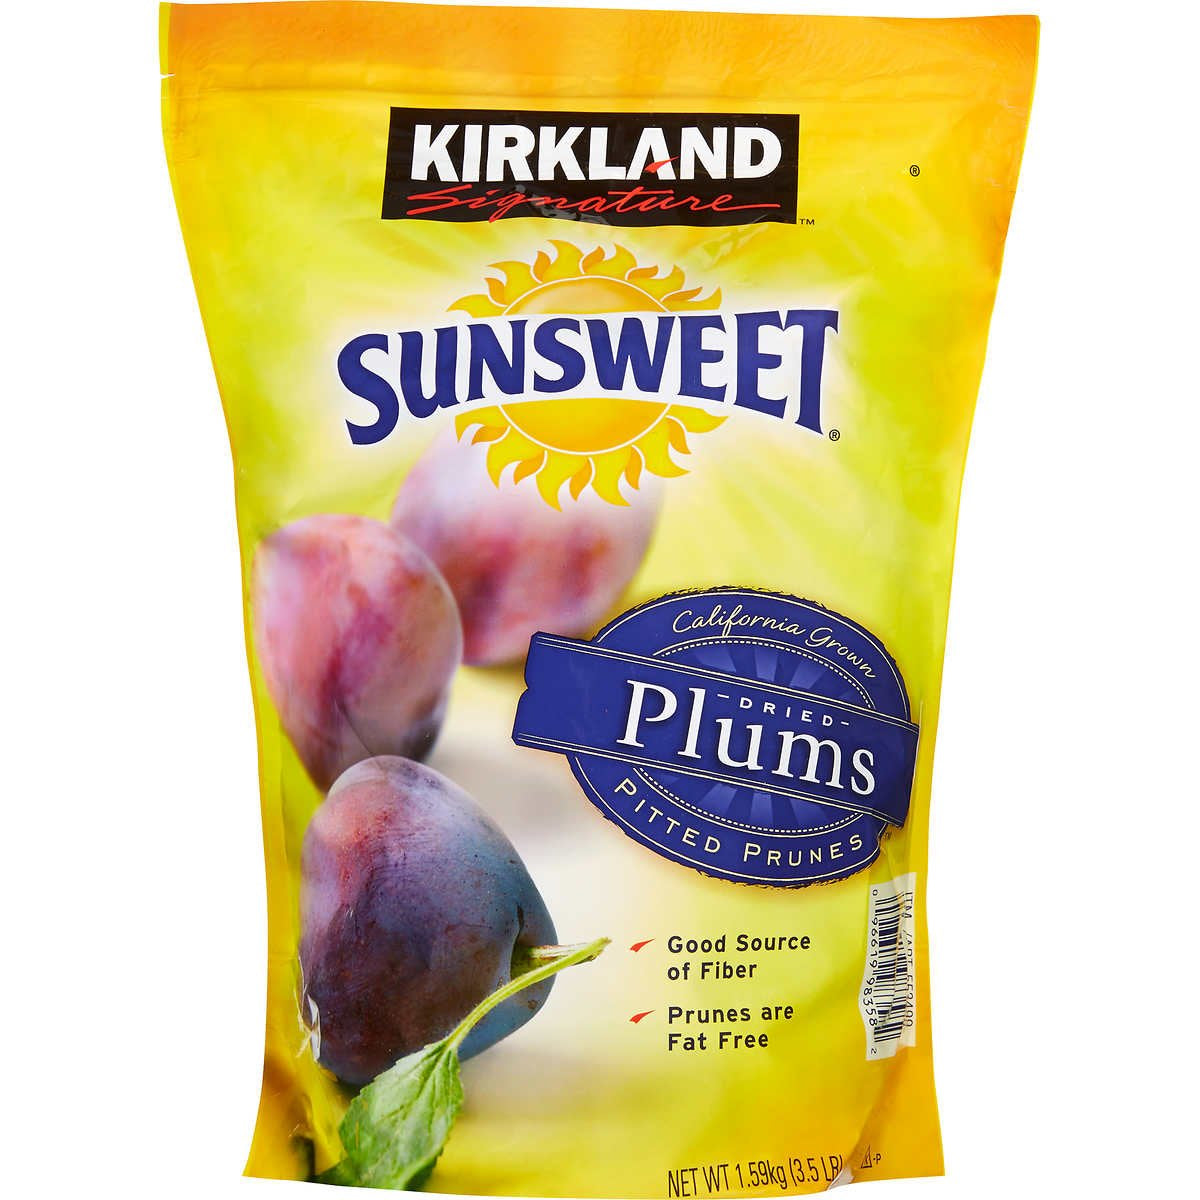 Kirkland s Dried Plums Pitted Prunes, 2 Pack